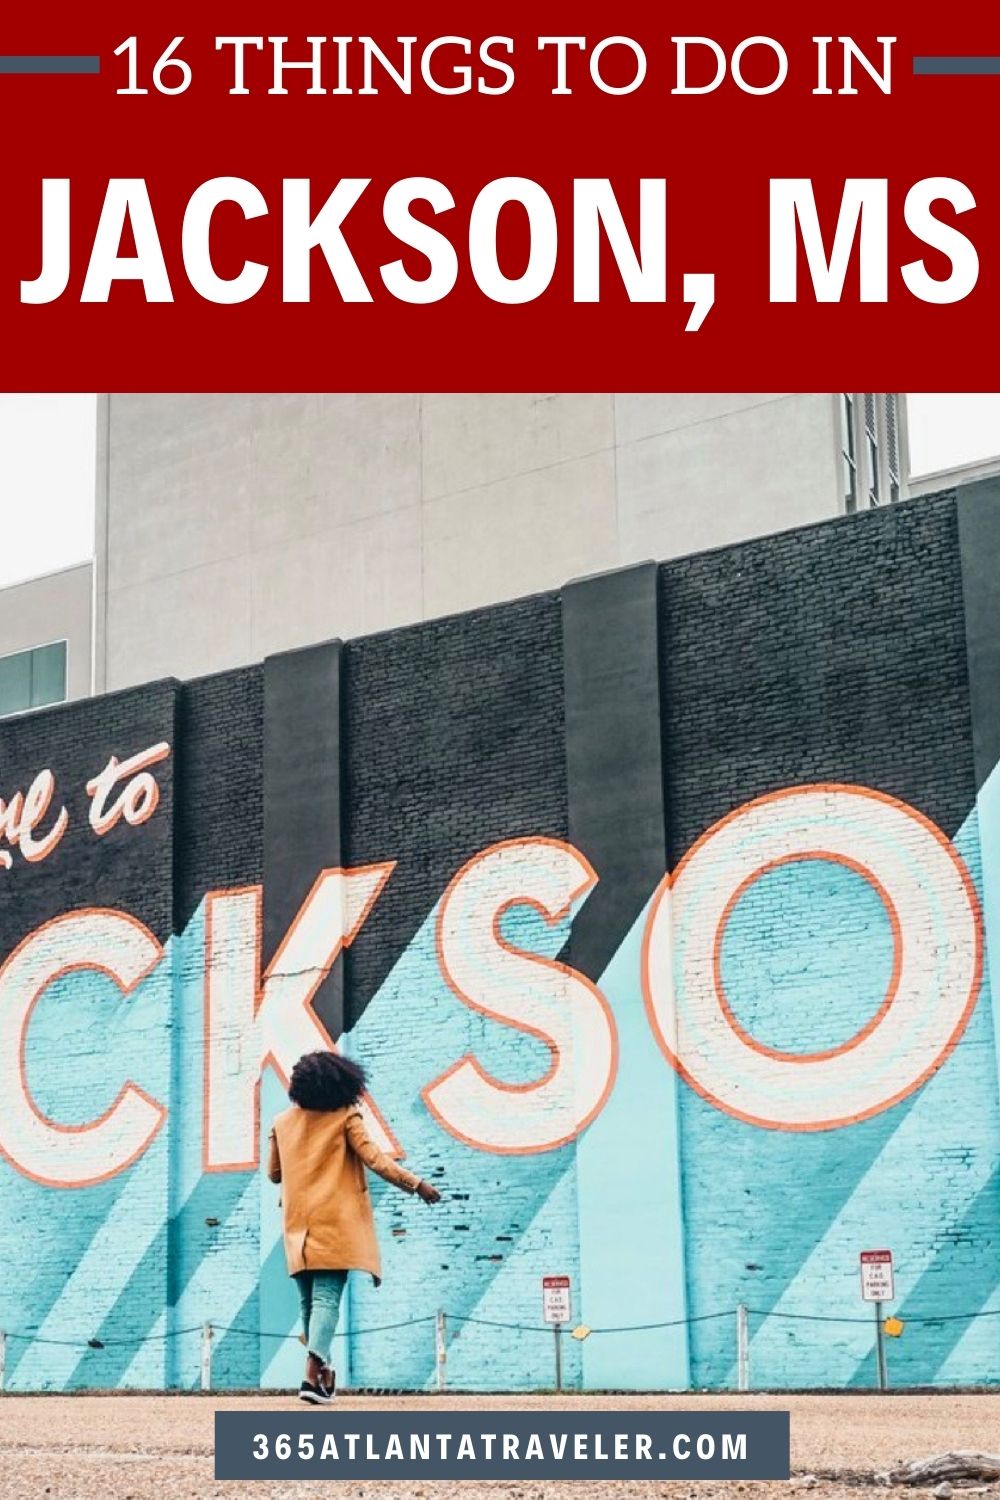 16 OUTSTANDING THINGS TO DO IN JACKSON MS